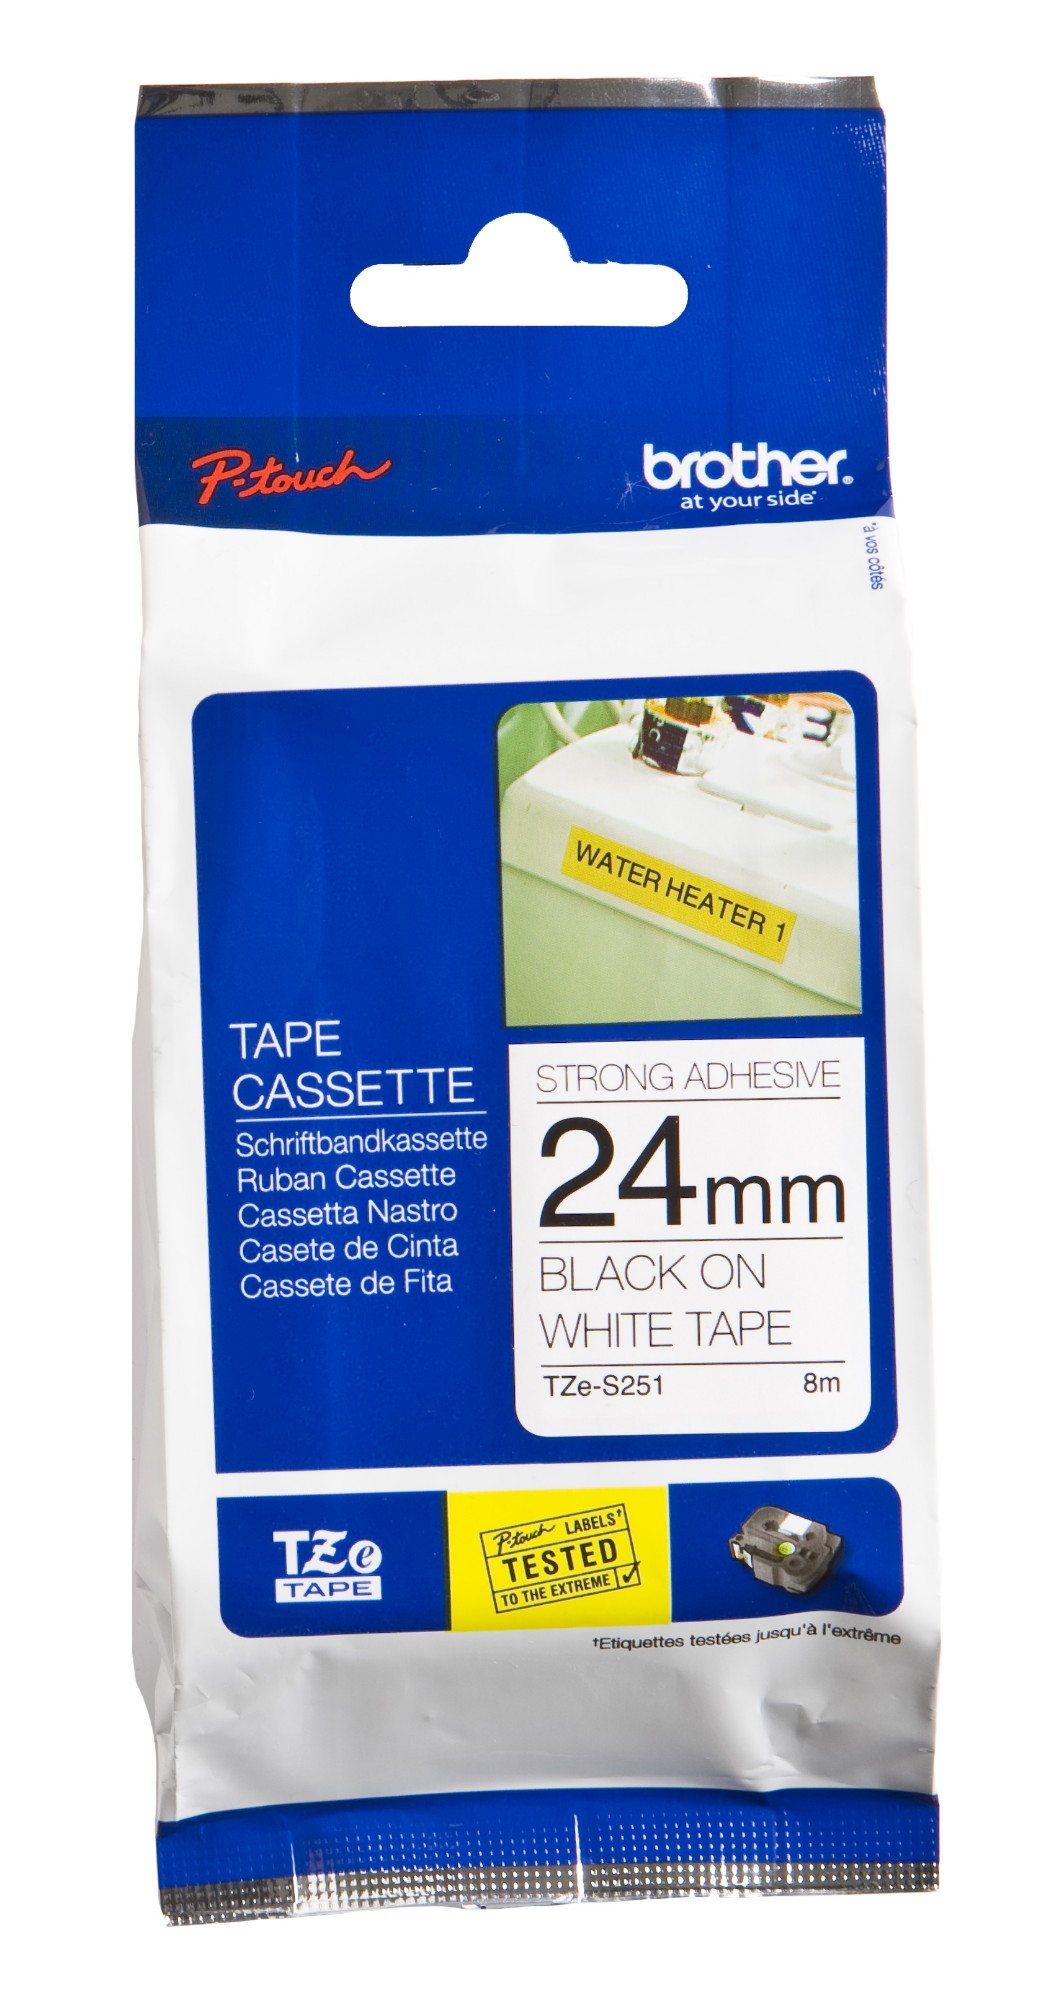 Brother TZE-S251 DirectLabel black on white extra strong Laminat 24mm x 8m for Brother P-Touch TZ 3.5-24mm/HSE/36mm/6-24mm/6-36mm